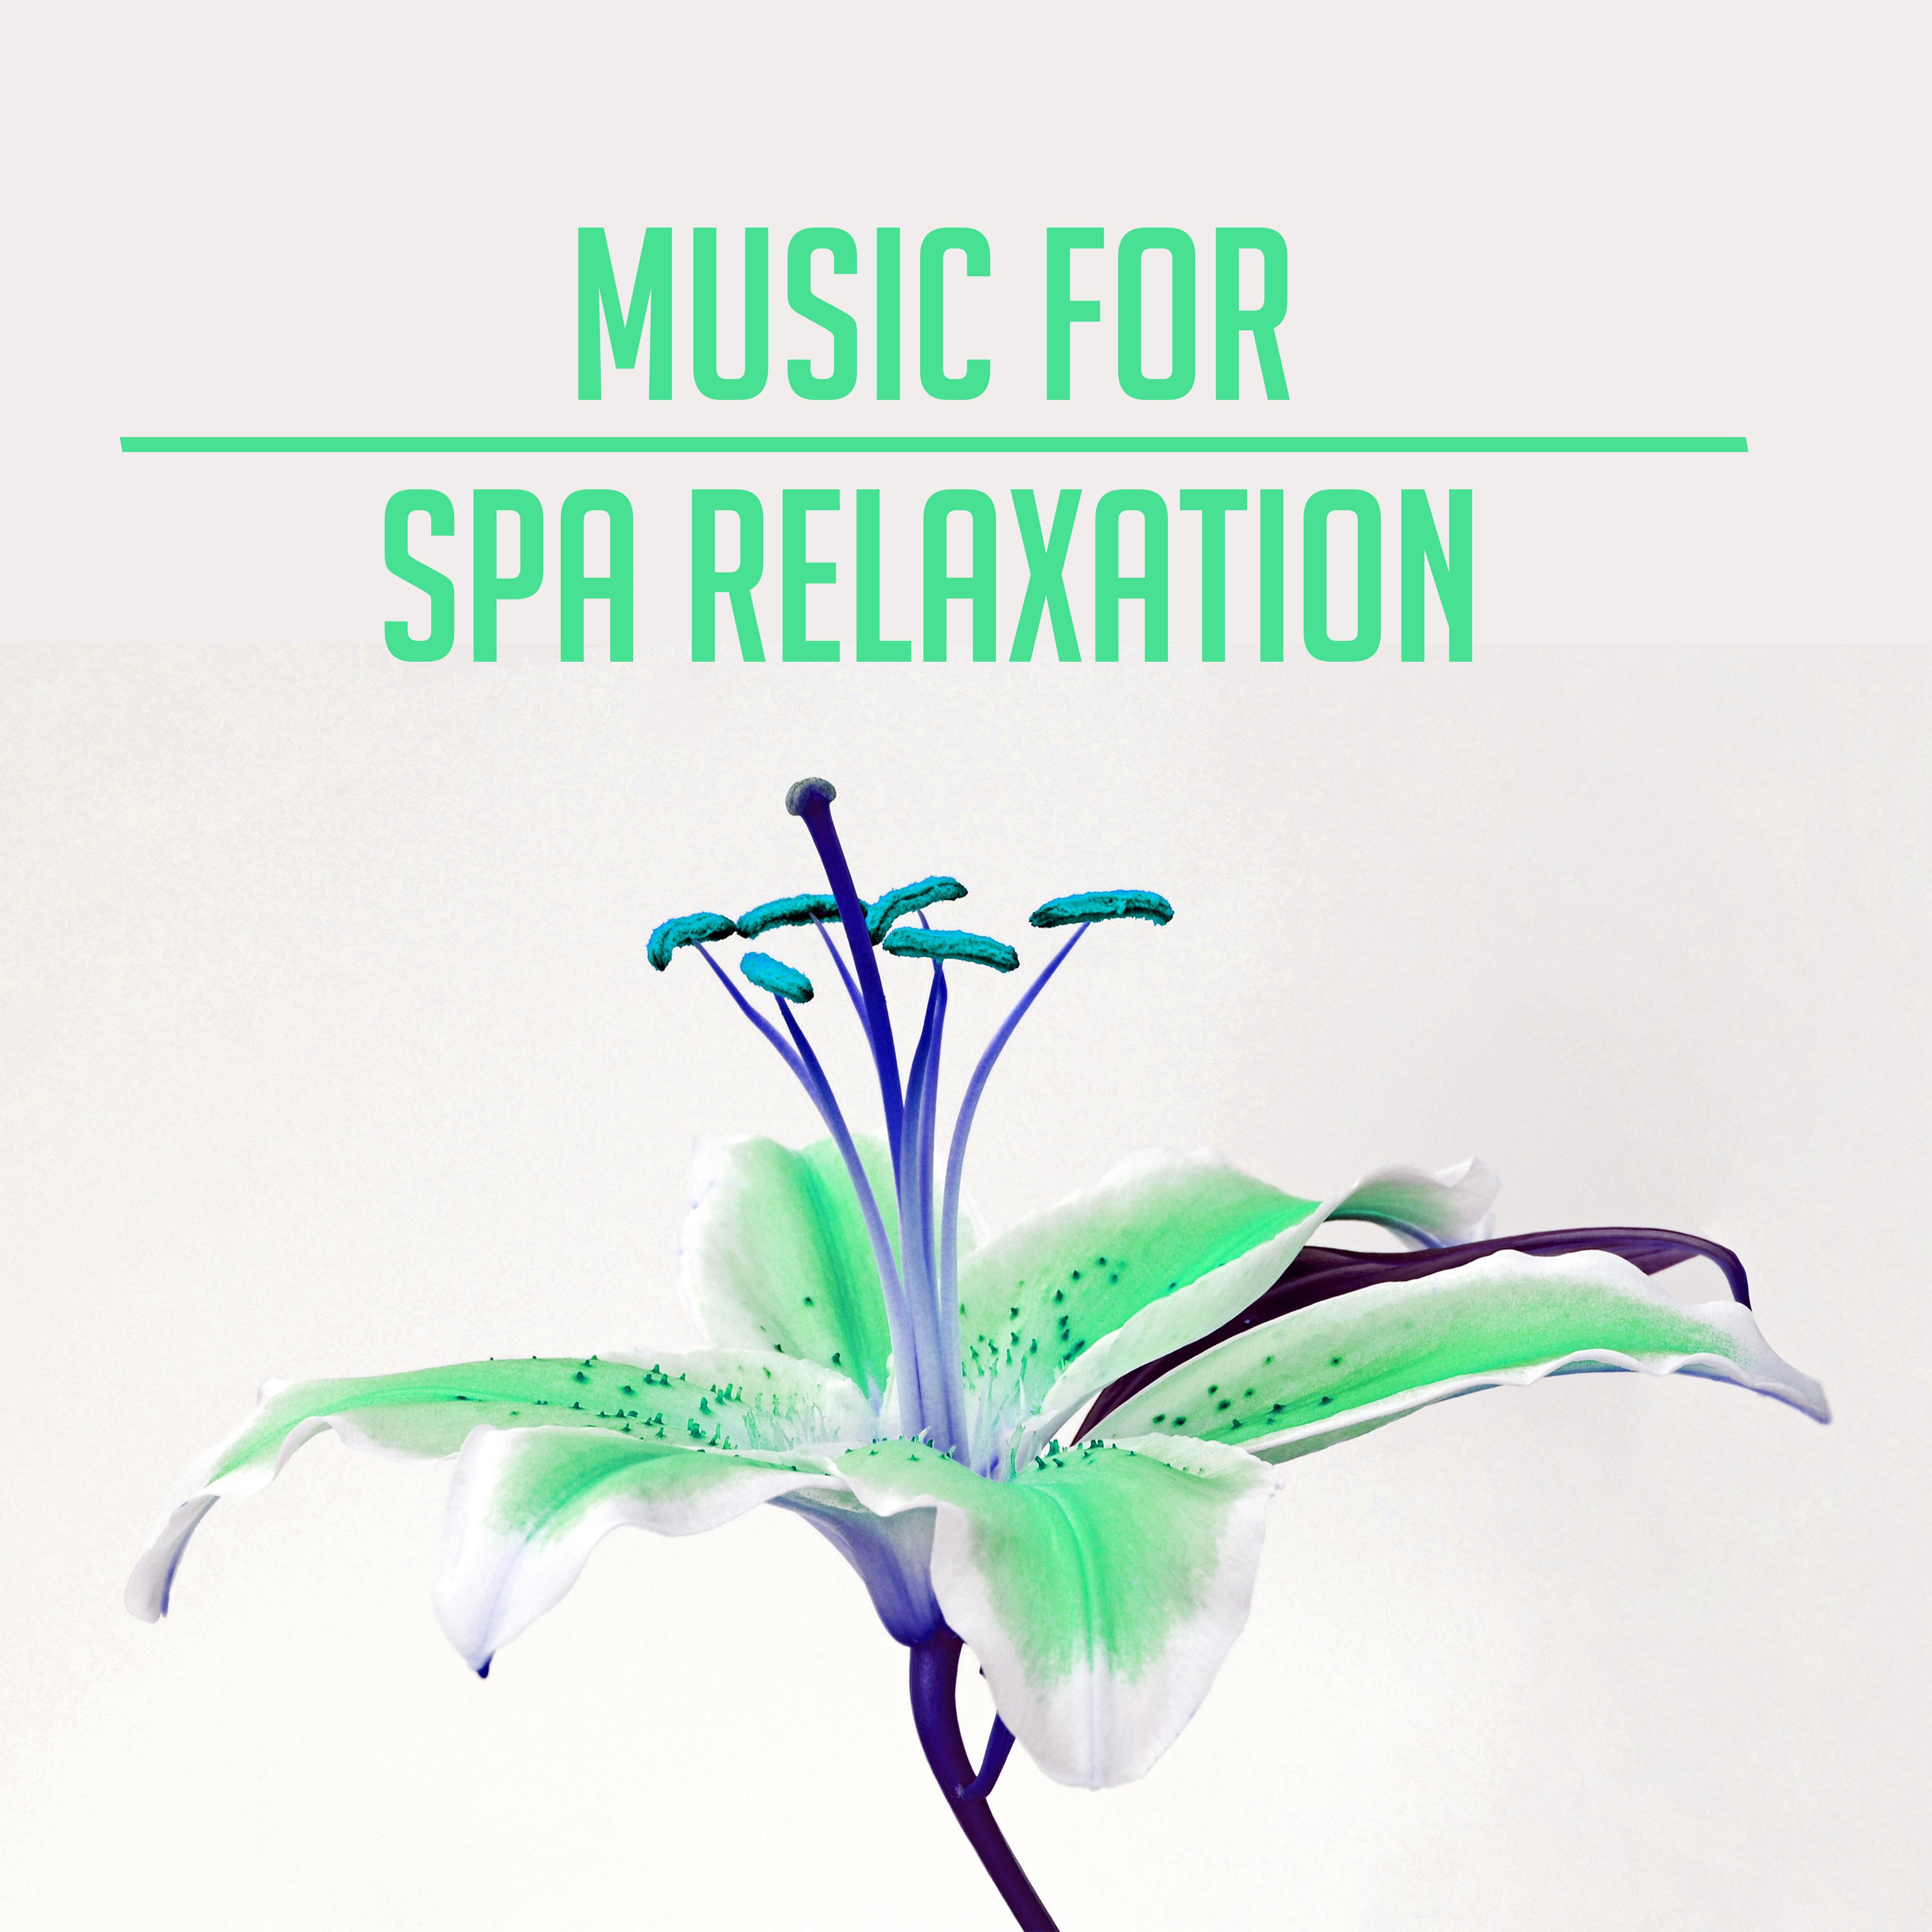 Music for Spa Relaxation  Soft Songs for Spa Hotel, Sensual Massage Music, Peaceful Waves, Calming Sounds